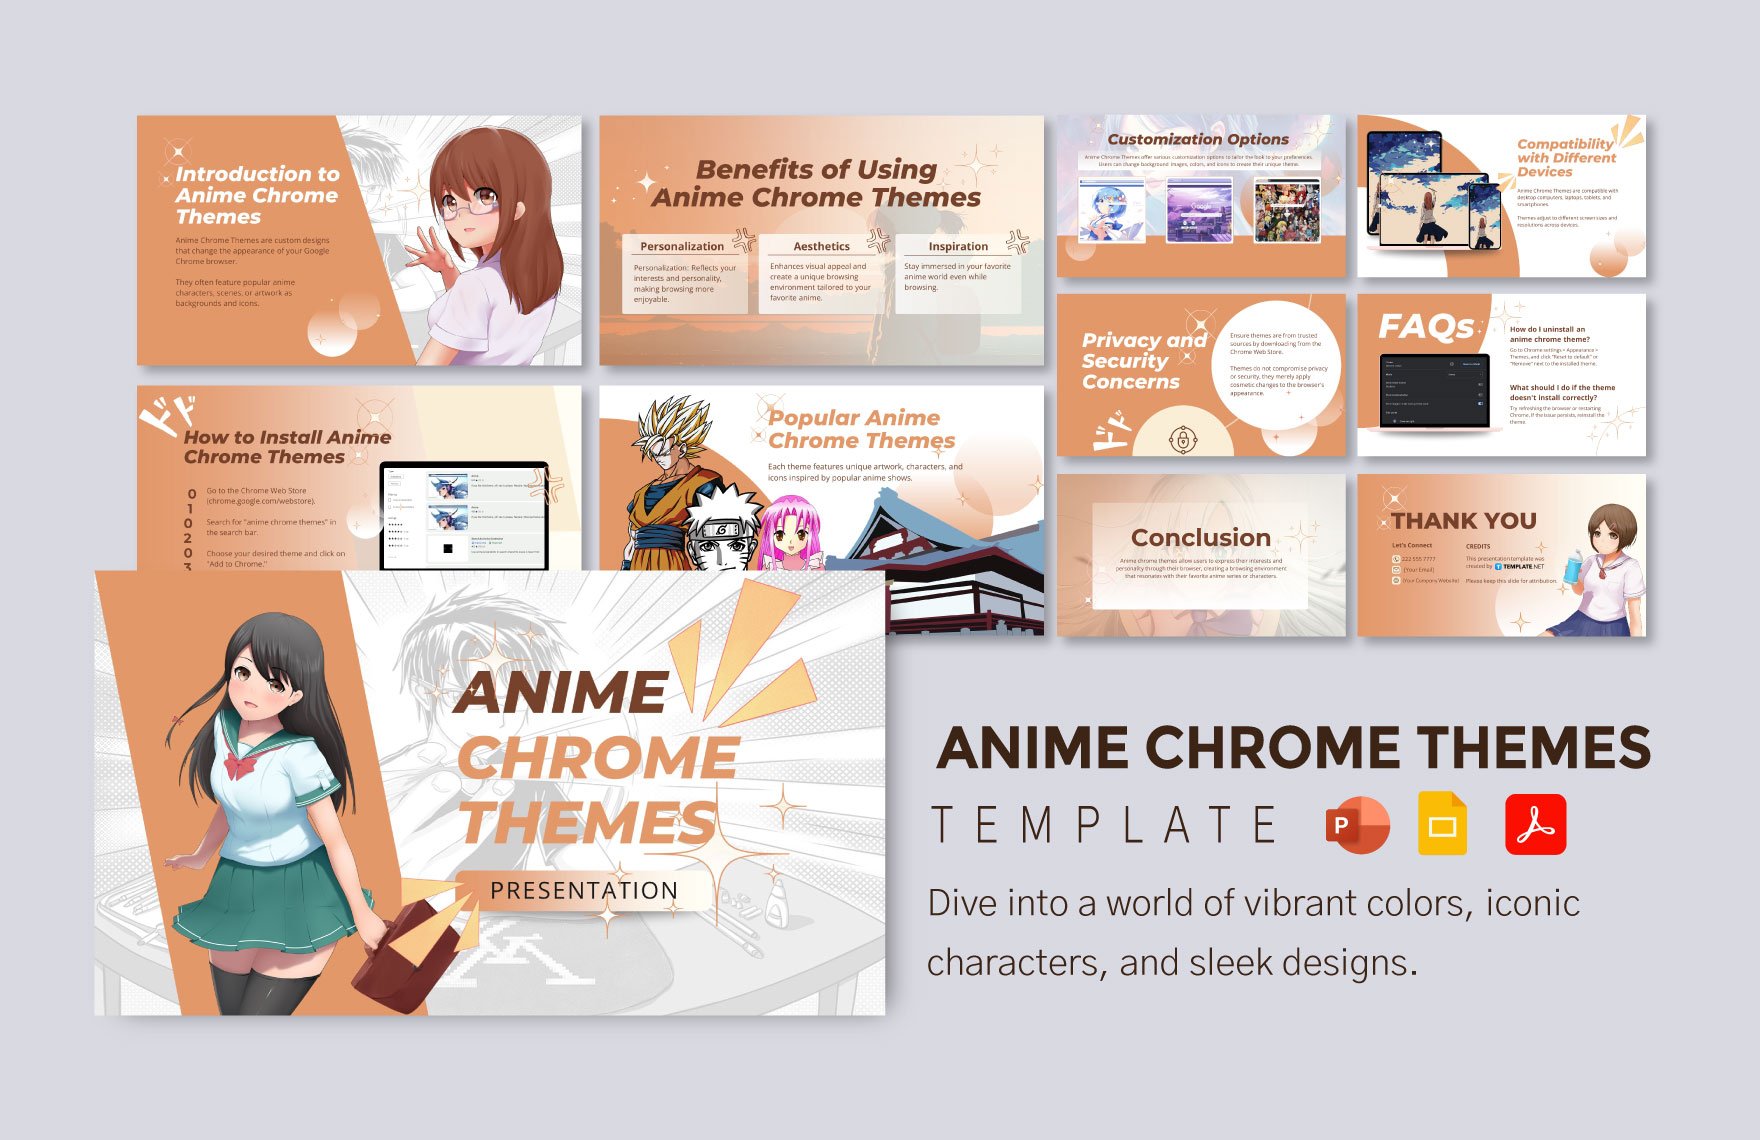 Anime Chrome Themes Template in PDF, PowerPoint, Google Slides